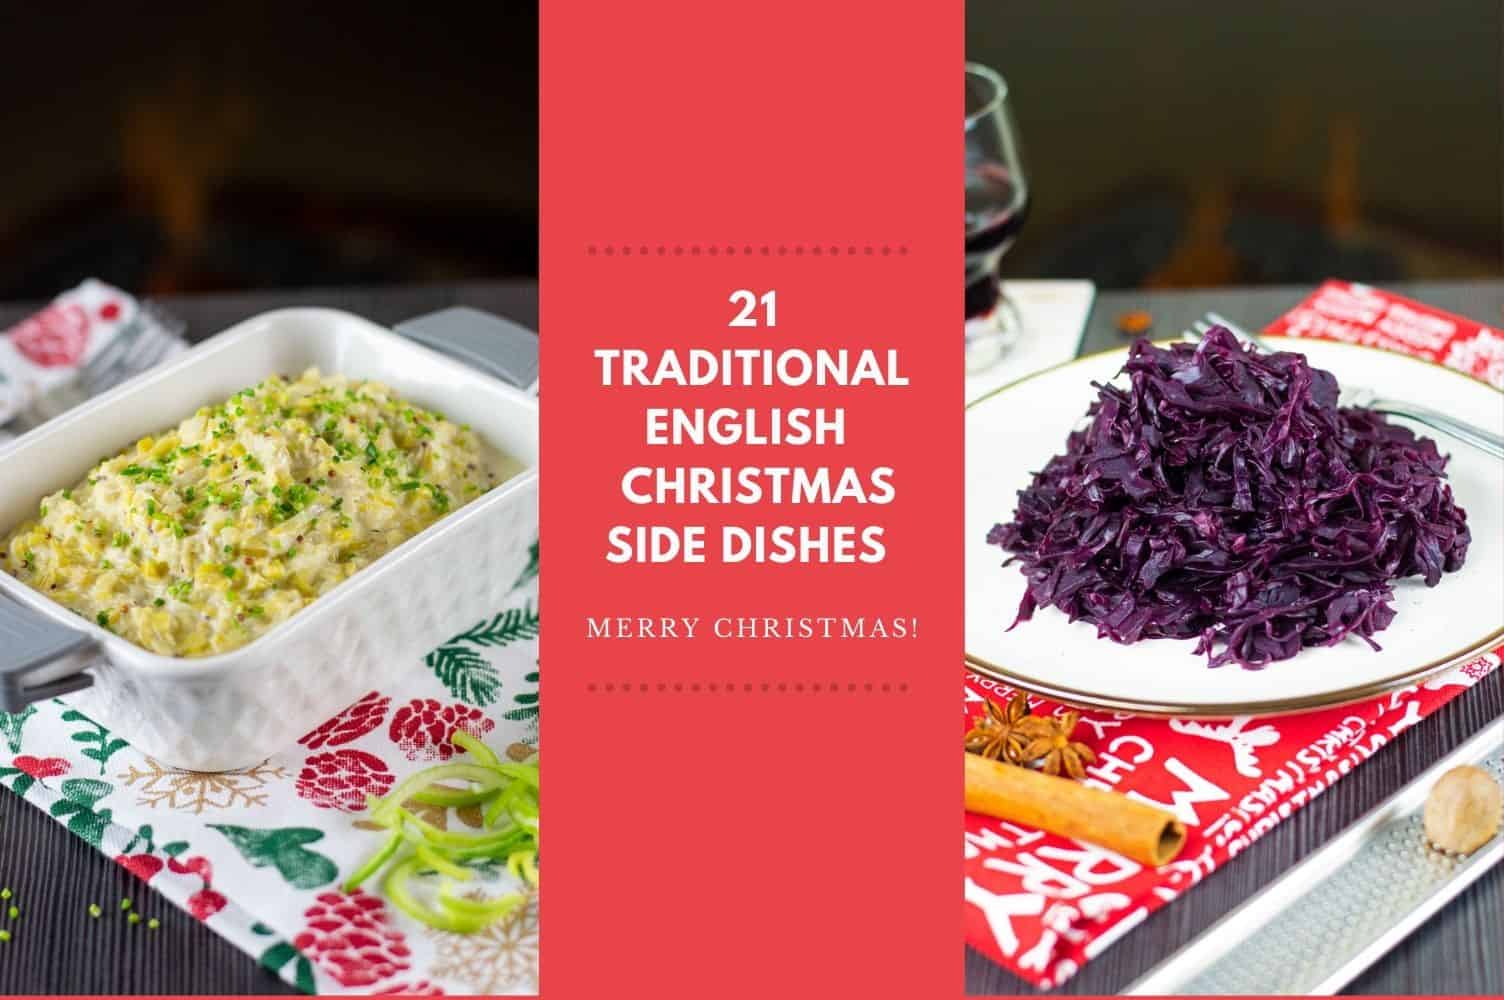 Two traditional english christmas sides of creamed leeks and braised red cabbage